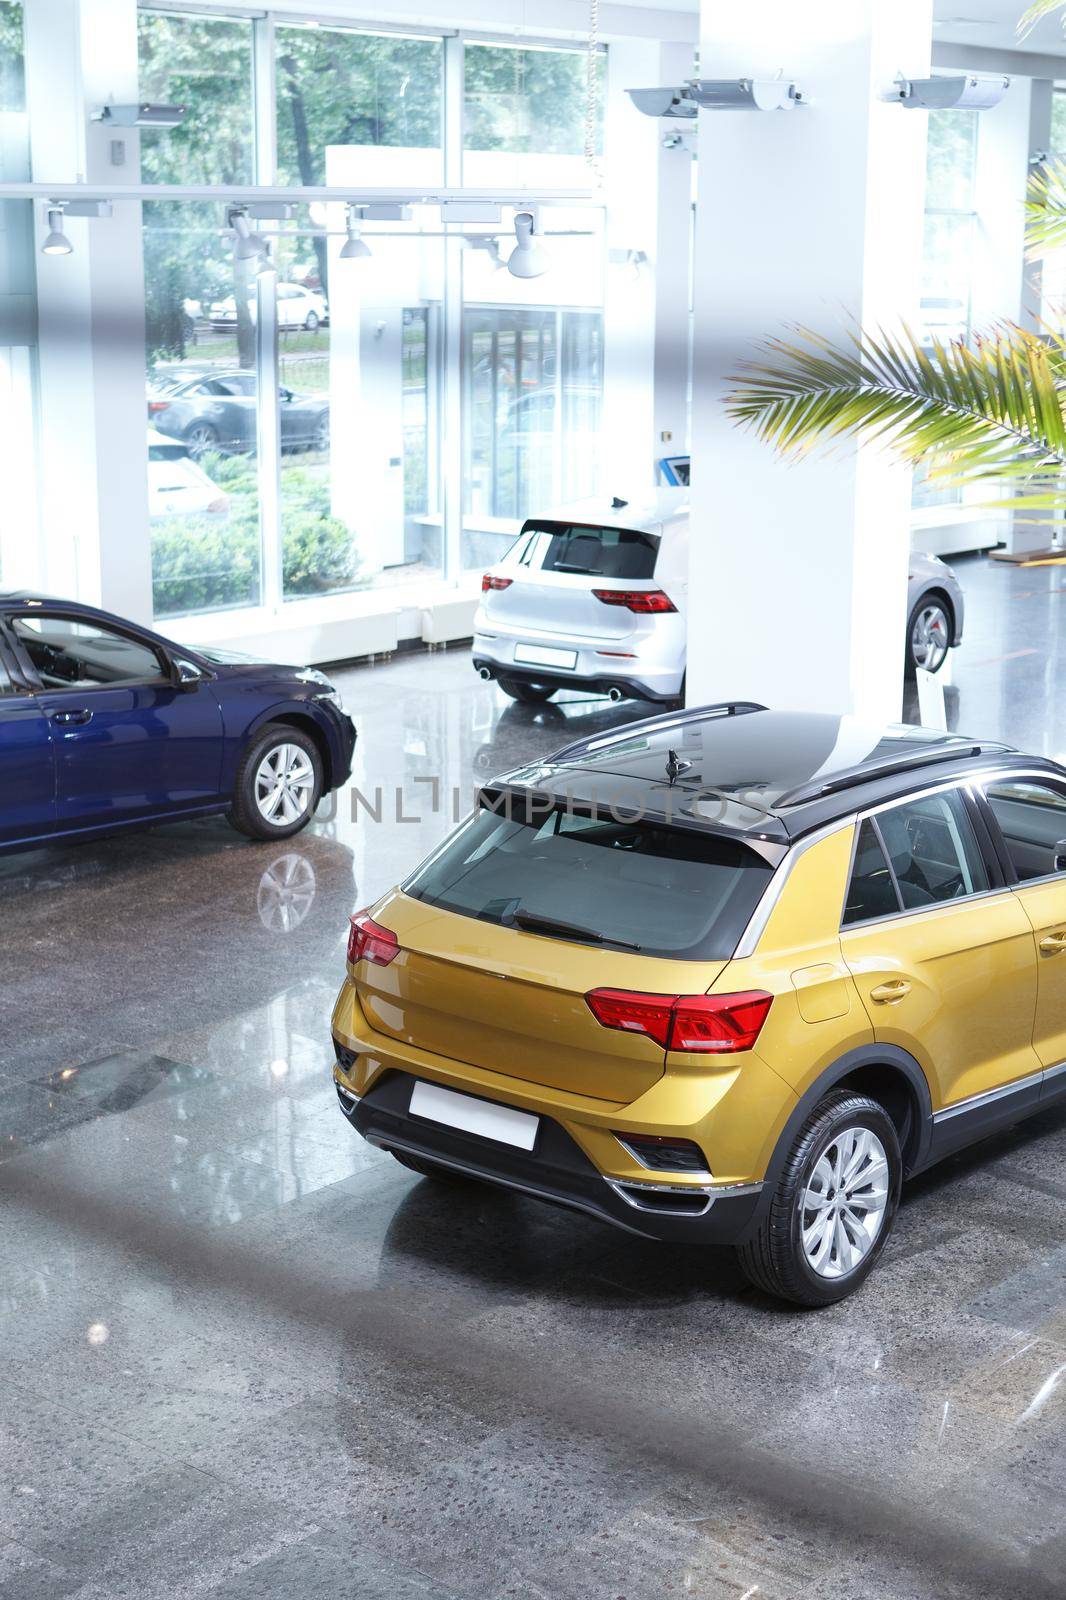 Vertical shot of new automobiles for sale at dealership salon